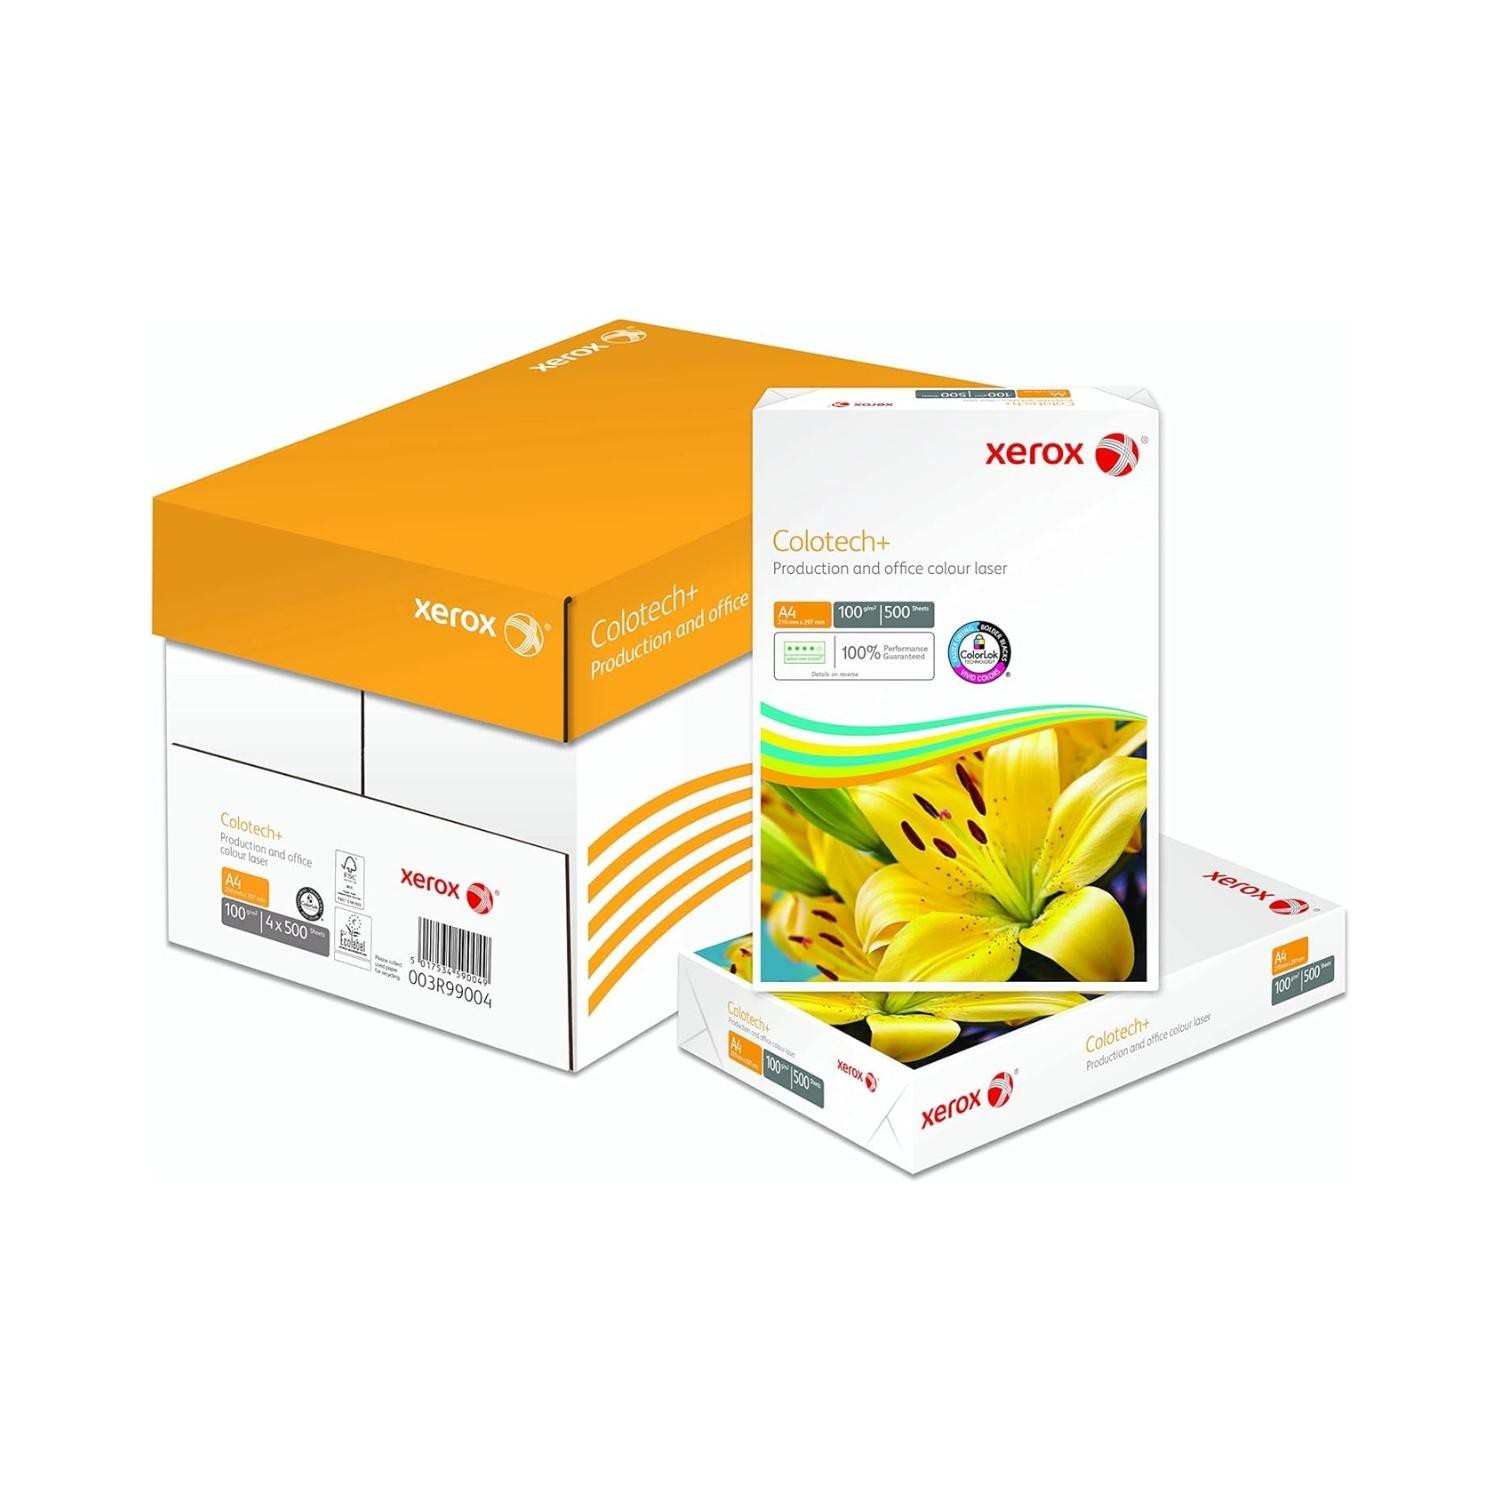 Xerox+Colotech%2B+A4+Super+Smooth+Paper+100gsm+White+500+Sheets